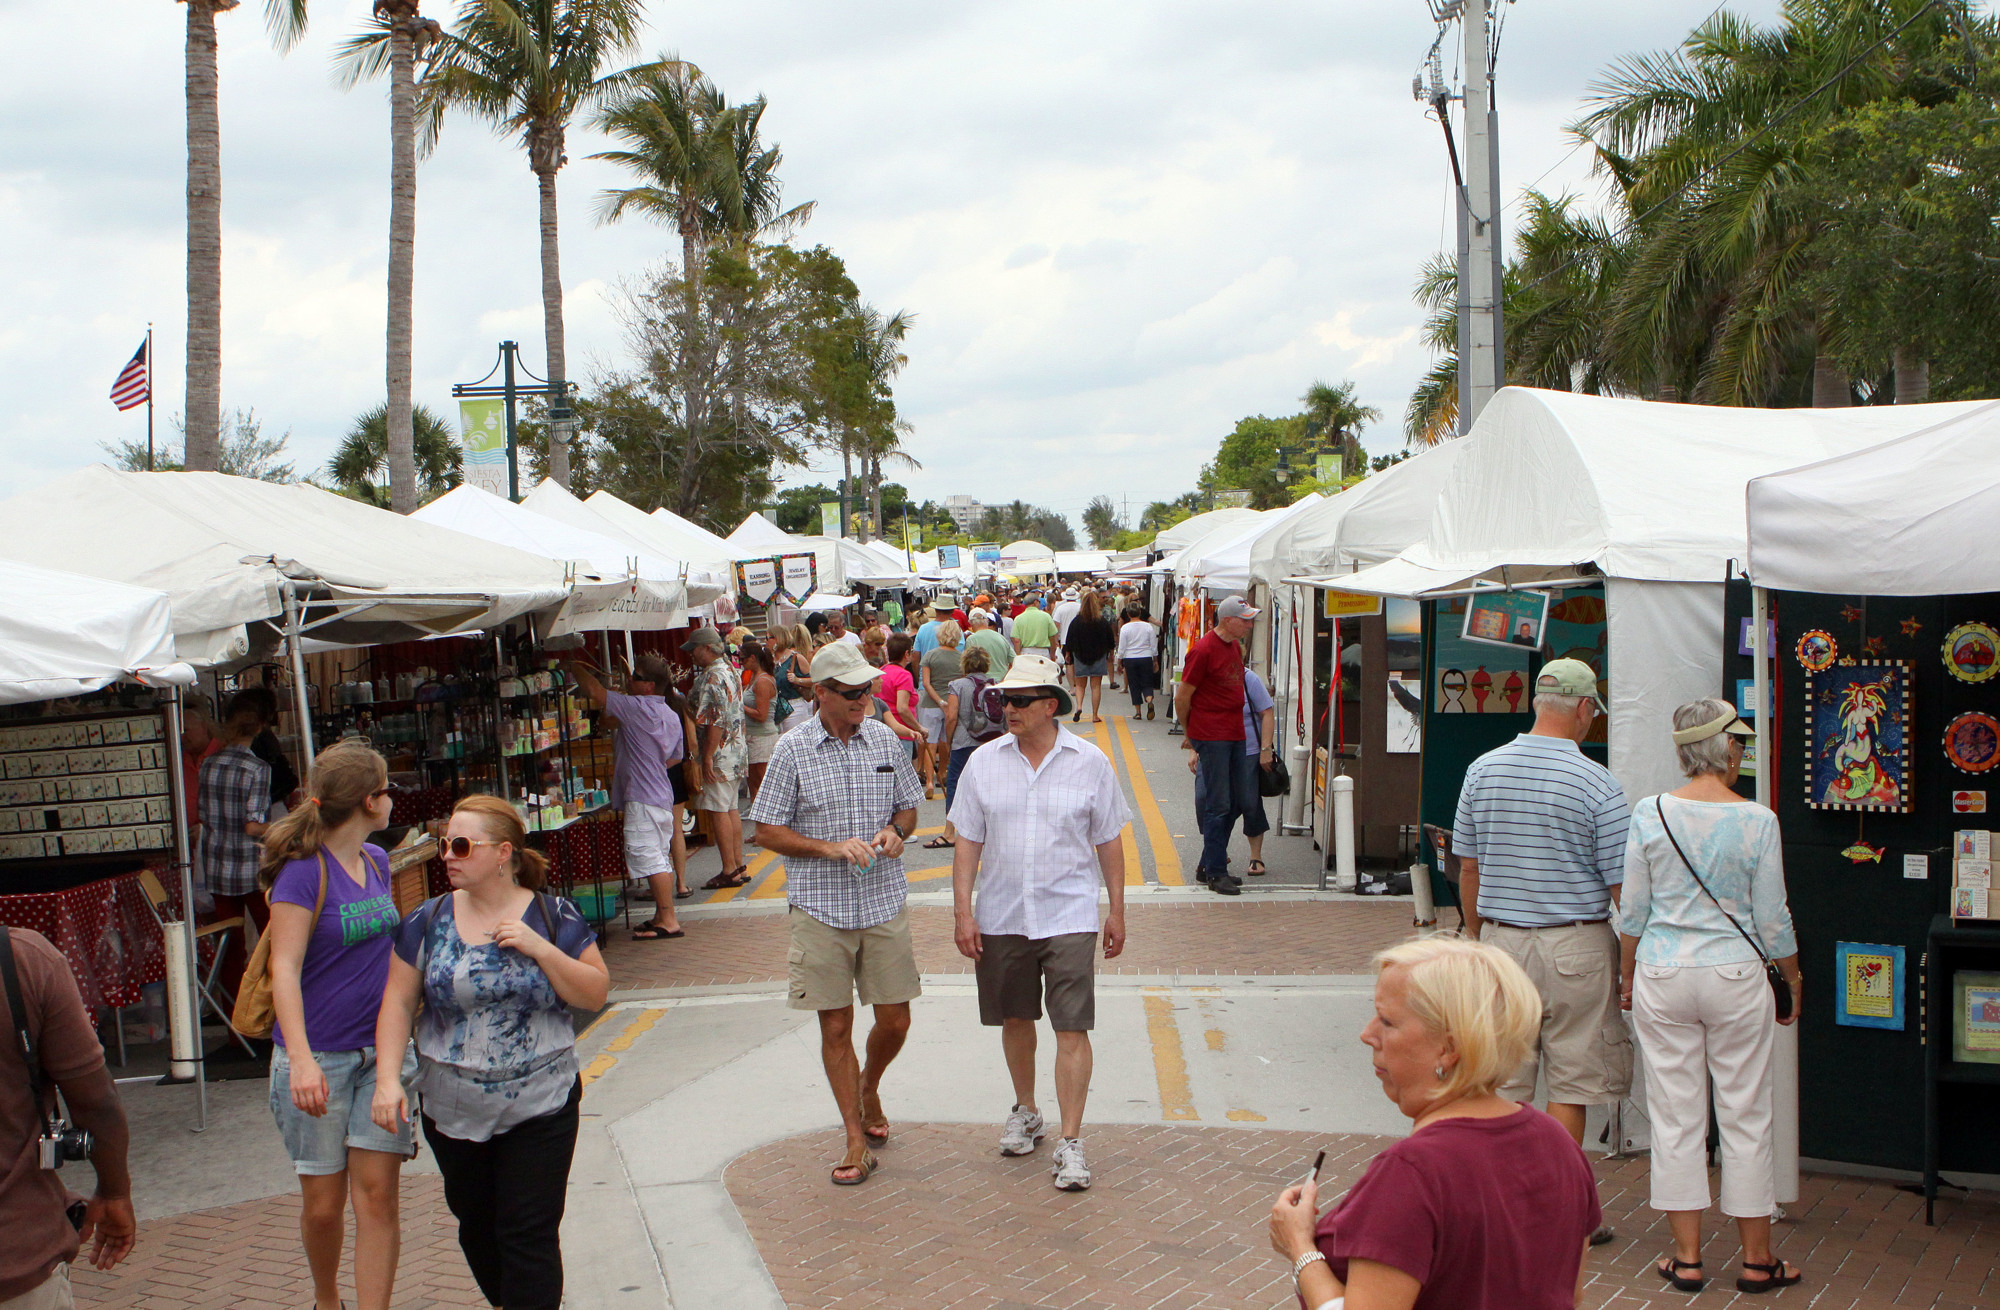 Until this year, the Siesta Fiesta occupied all of Ocean Boulevard — which drew complaints from some businesses in the village.